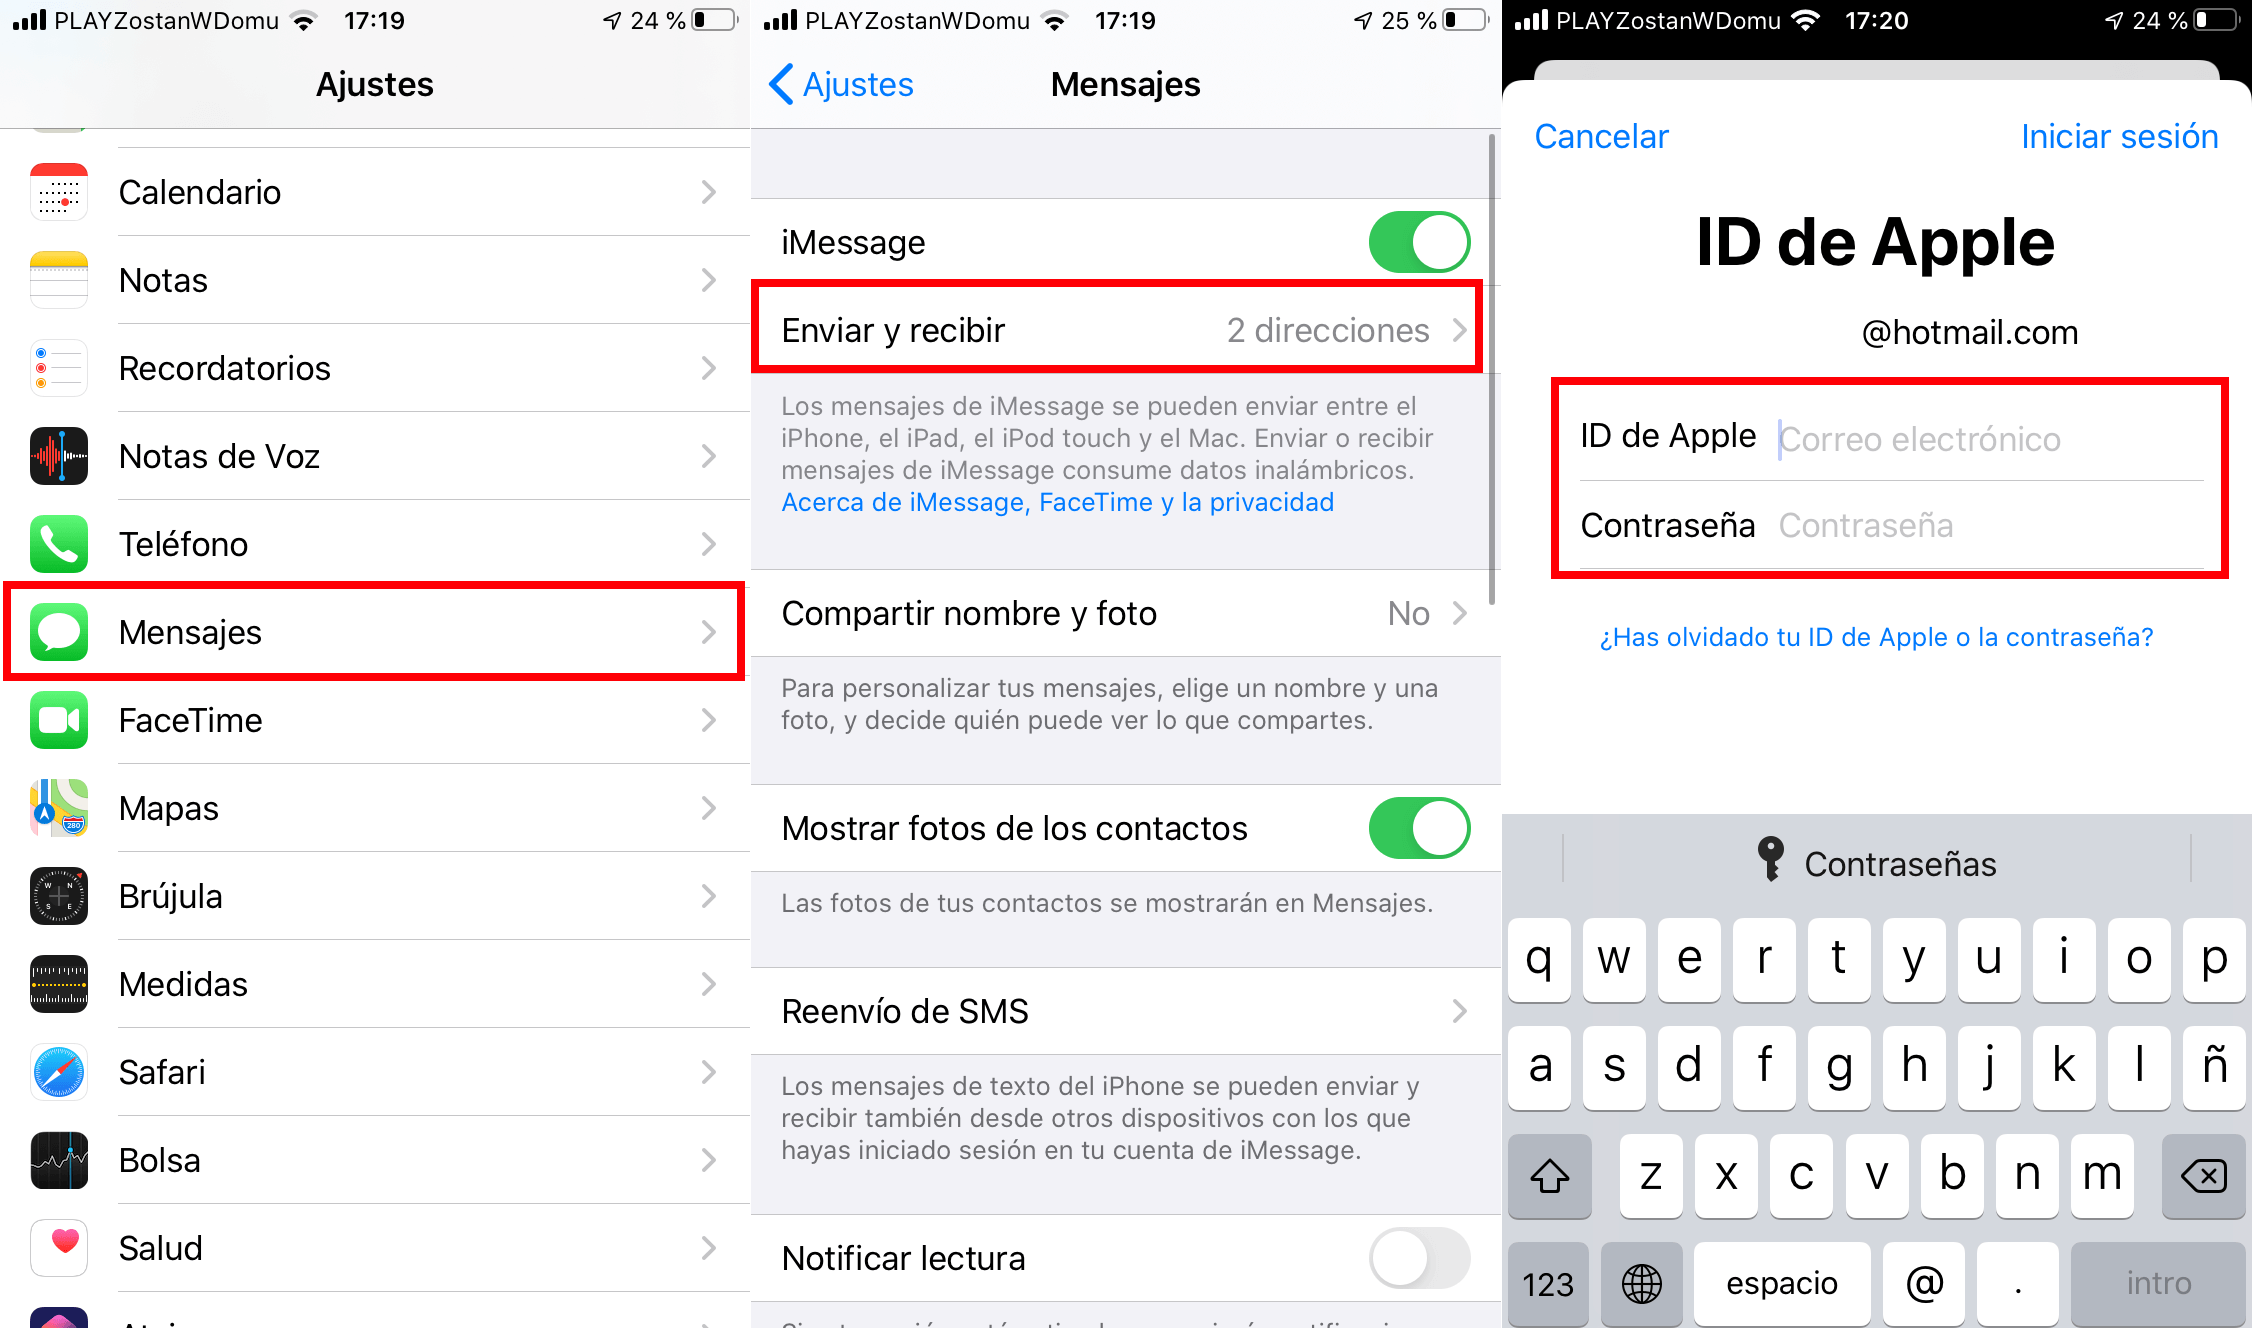 share photo and name error on iPhone 